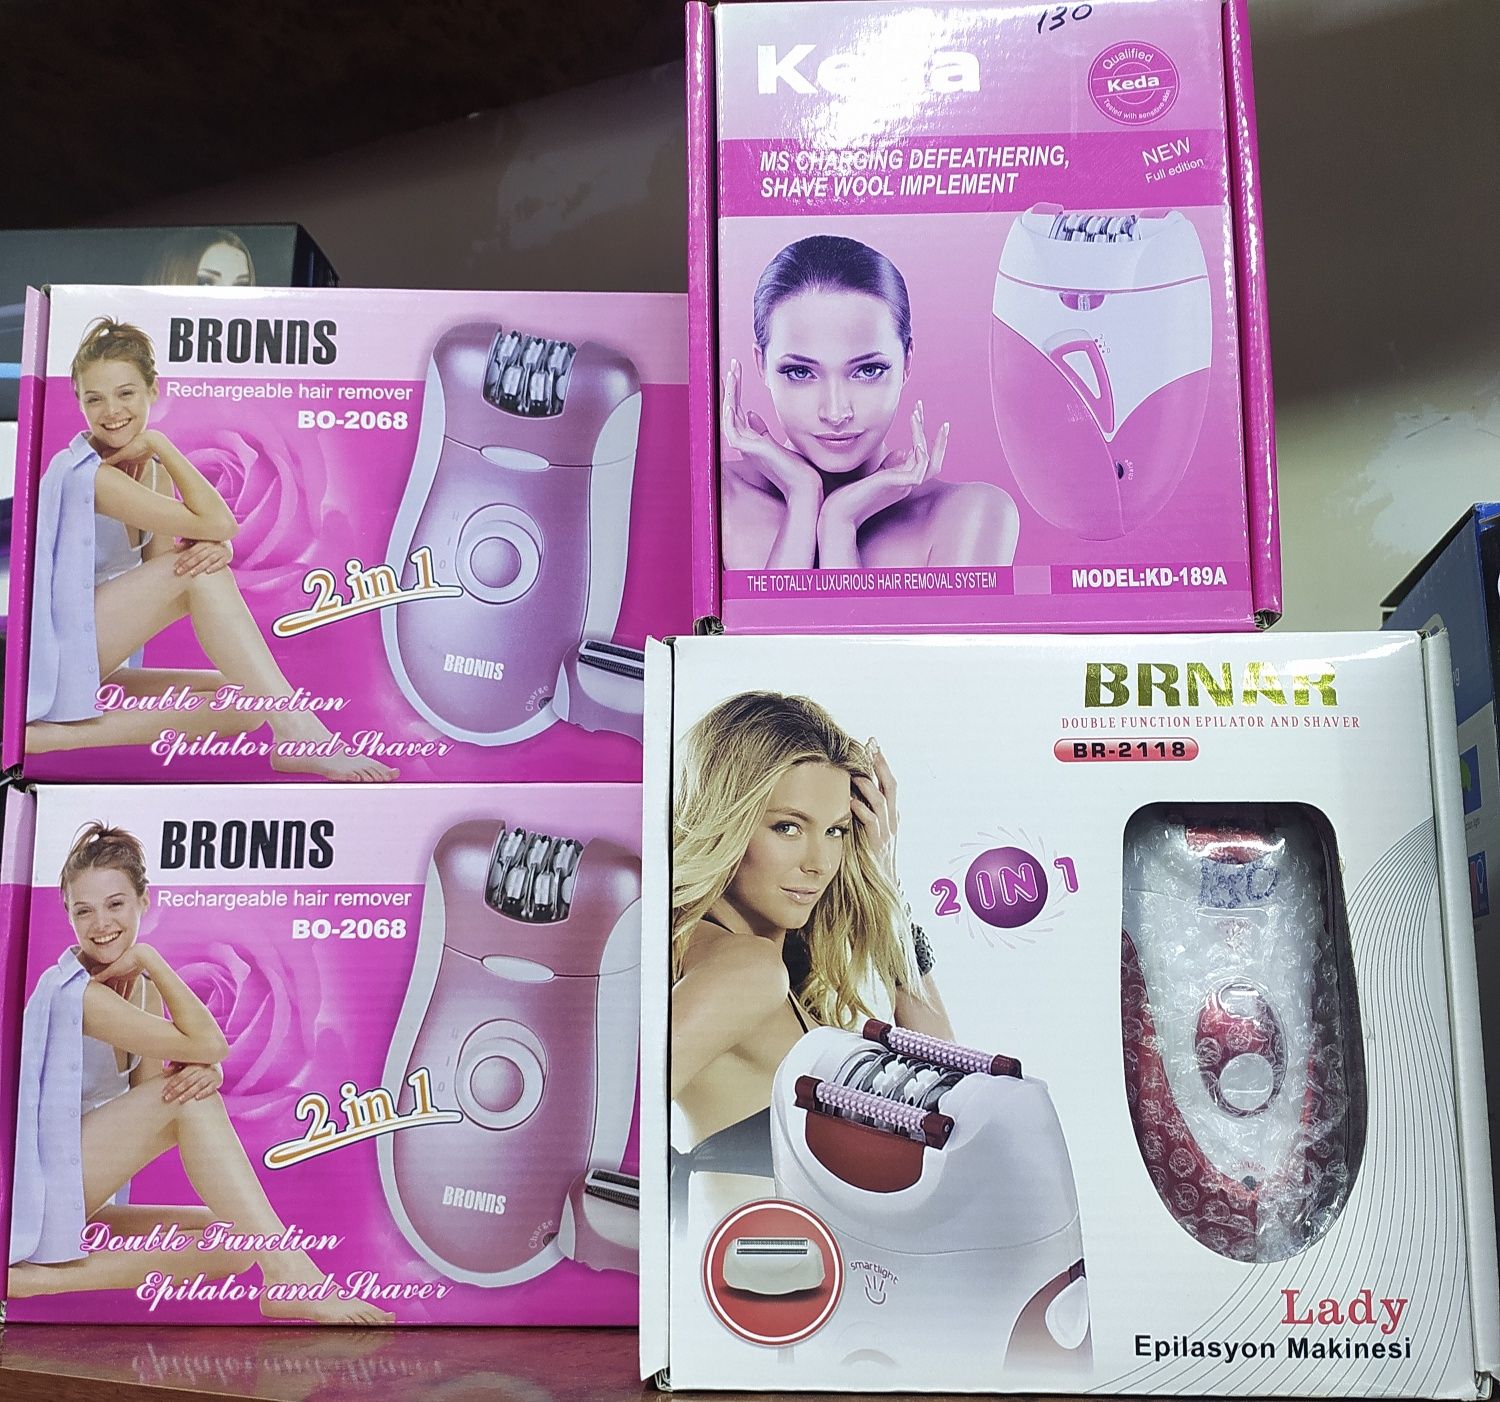 BRONns 2 in 1 
Made in china BO-2068
Double Function Epilator and Shav